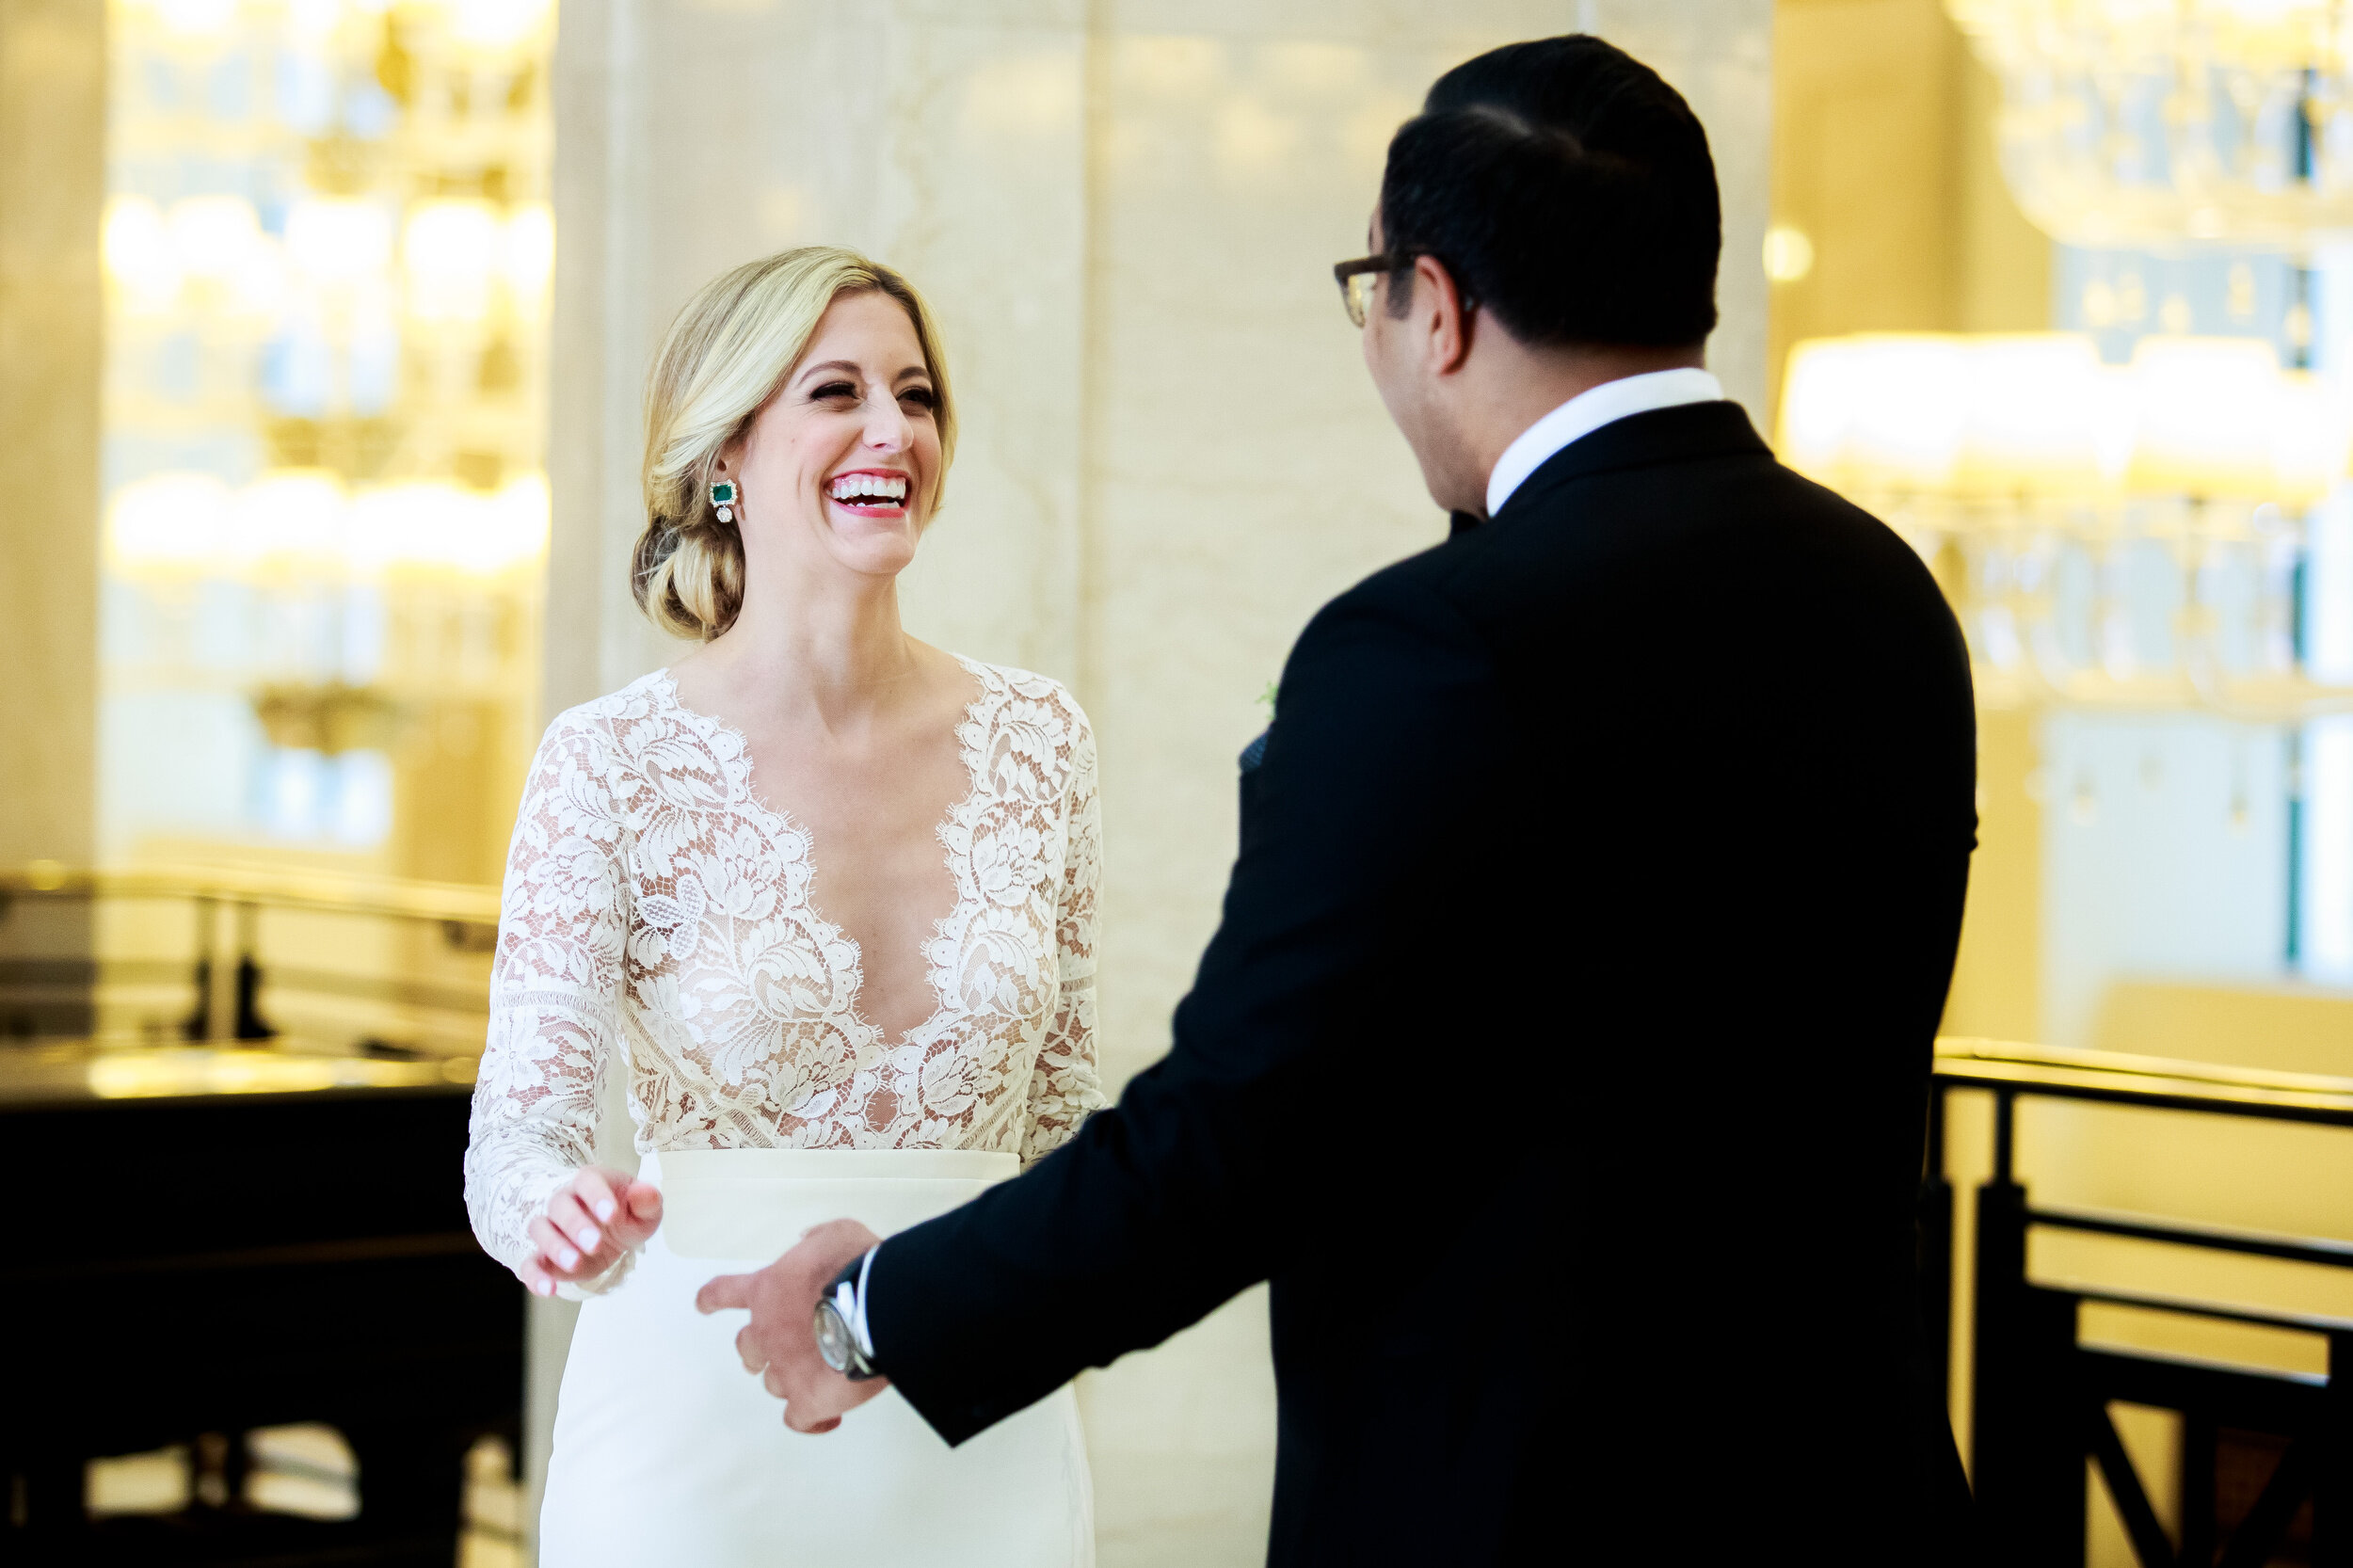 Bride and groom first look: Geraghty Chicago wedding photography captured by J. Brown Photography.